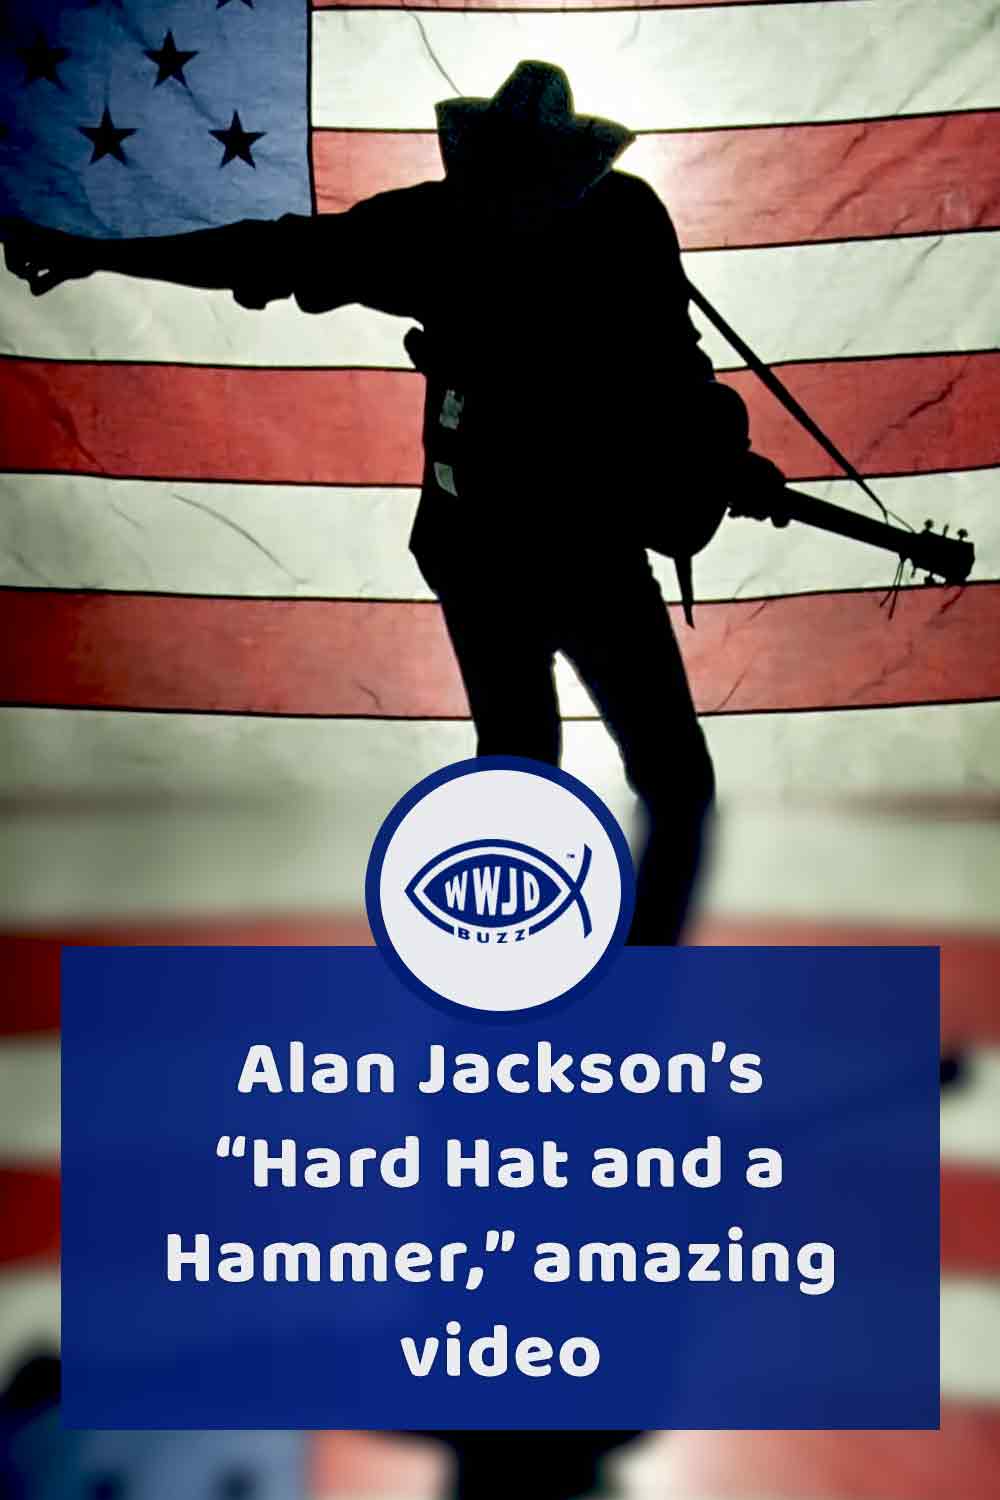 Alan Jackson’s “Hard Hat and a Hammer,” amazing video